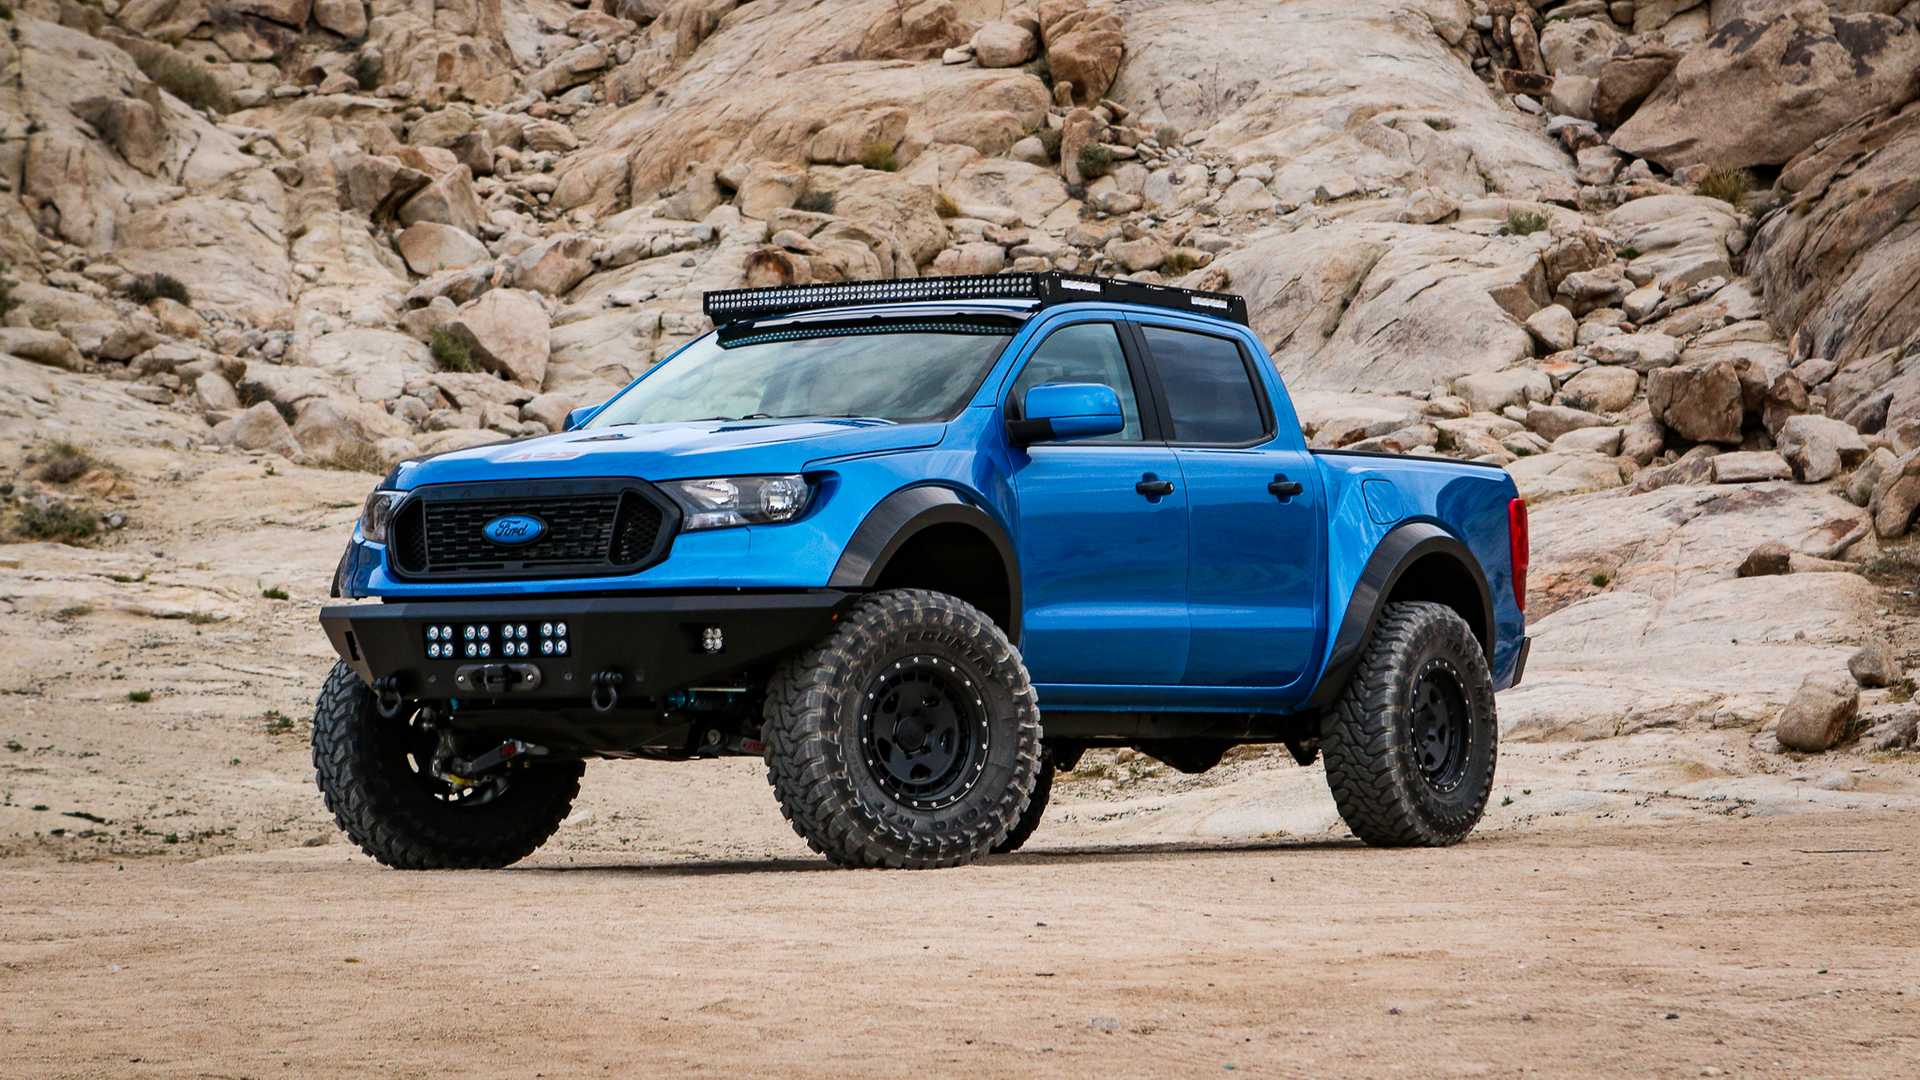 Ford Ranger Offroad Tuning